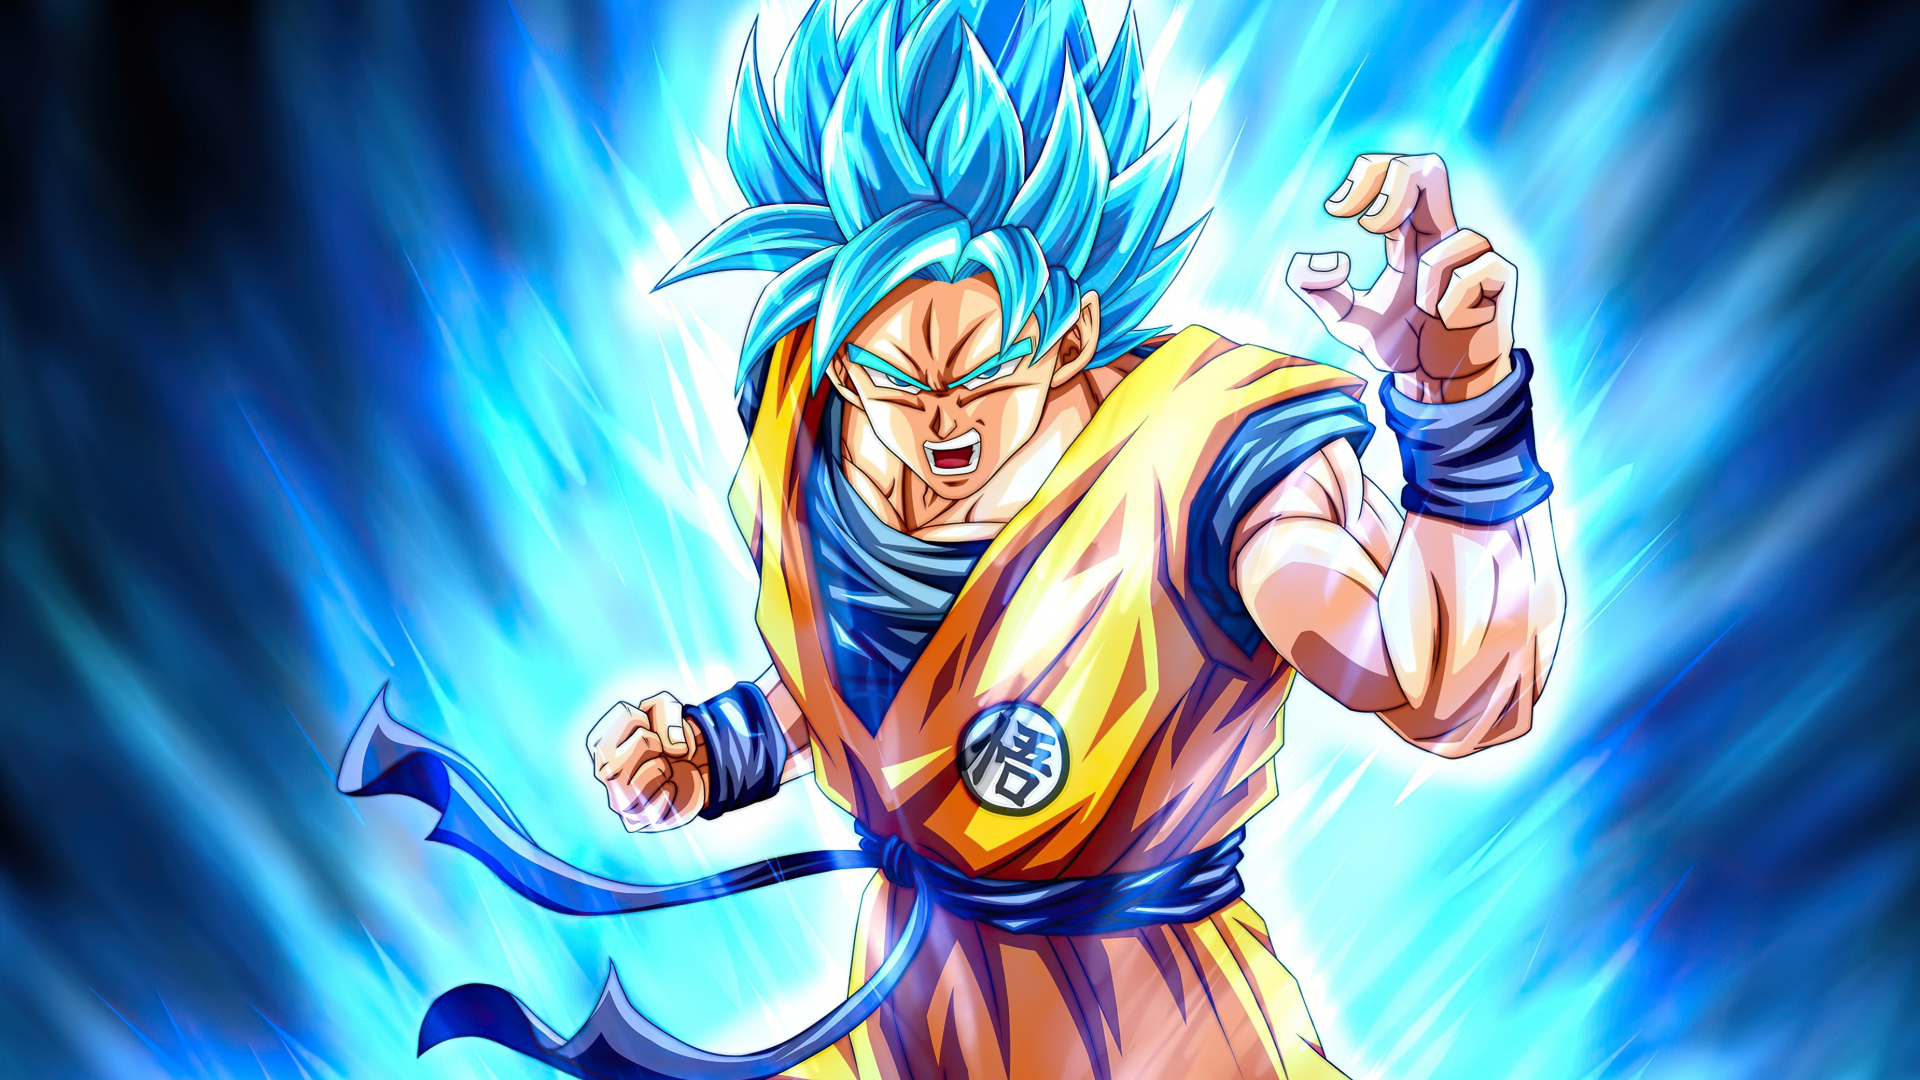 Goku's Power-Up: Blue Kaioken with White Hair - wide 4